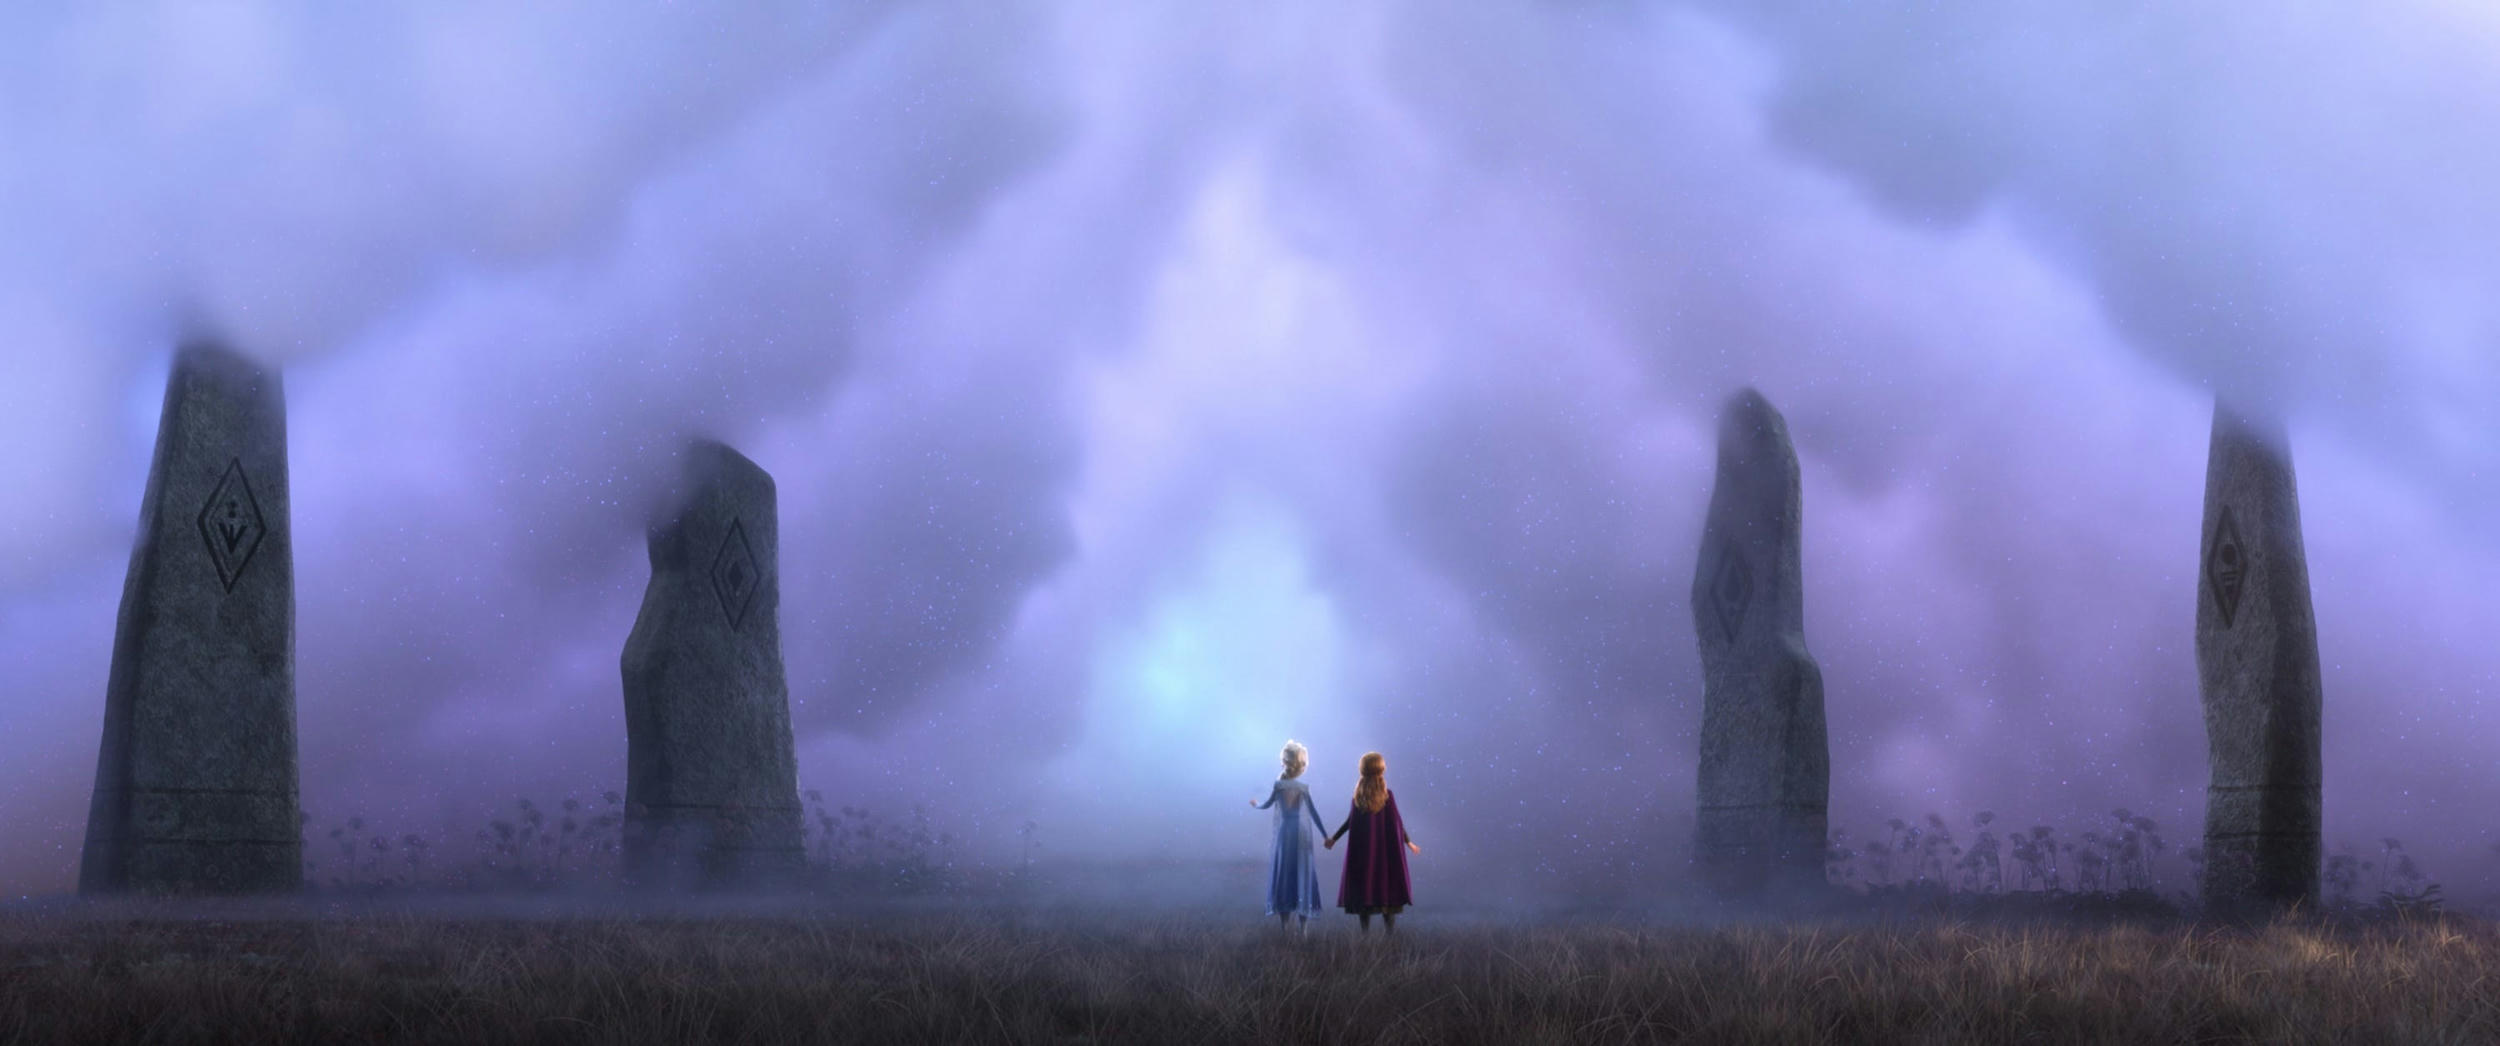 Frozen 2 - Elsa and Anna walking into the Unknown